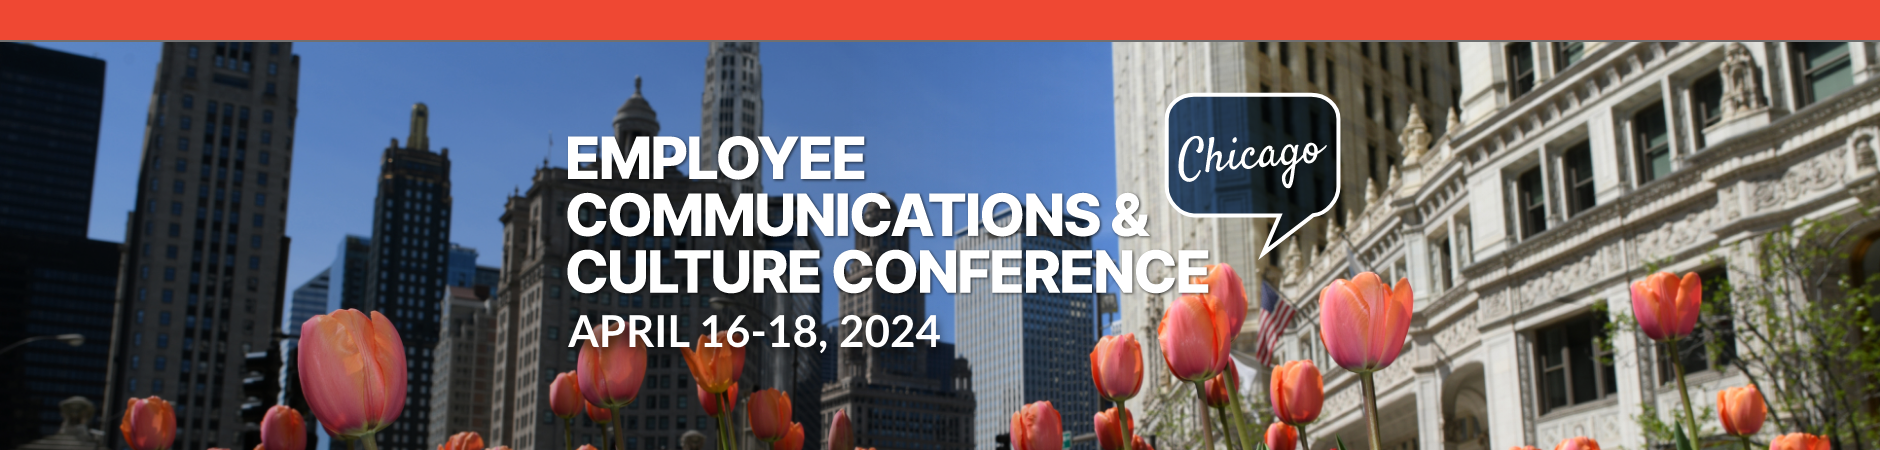 Employee Communications Conference 